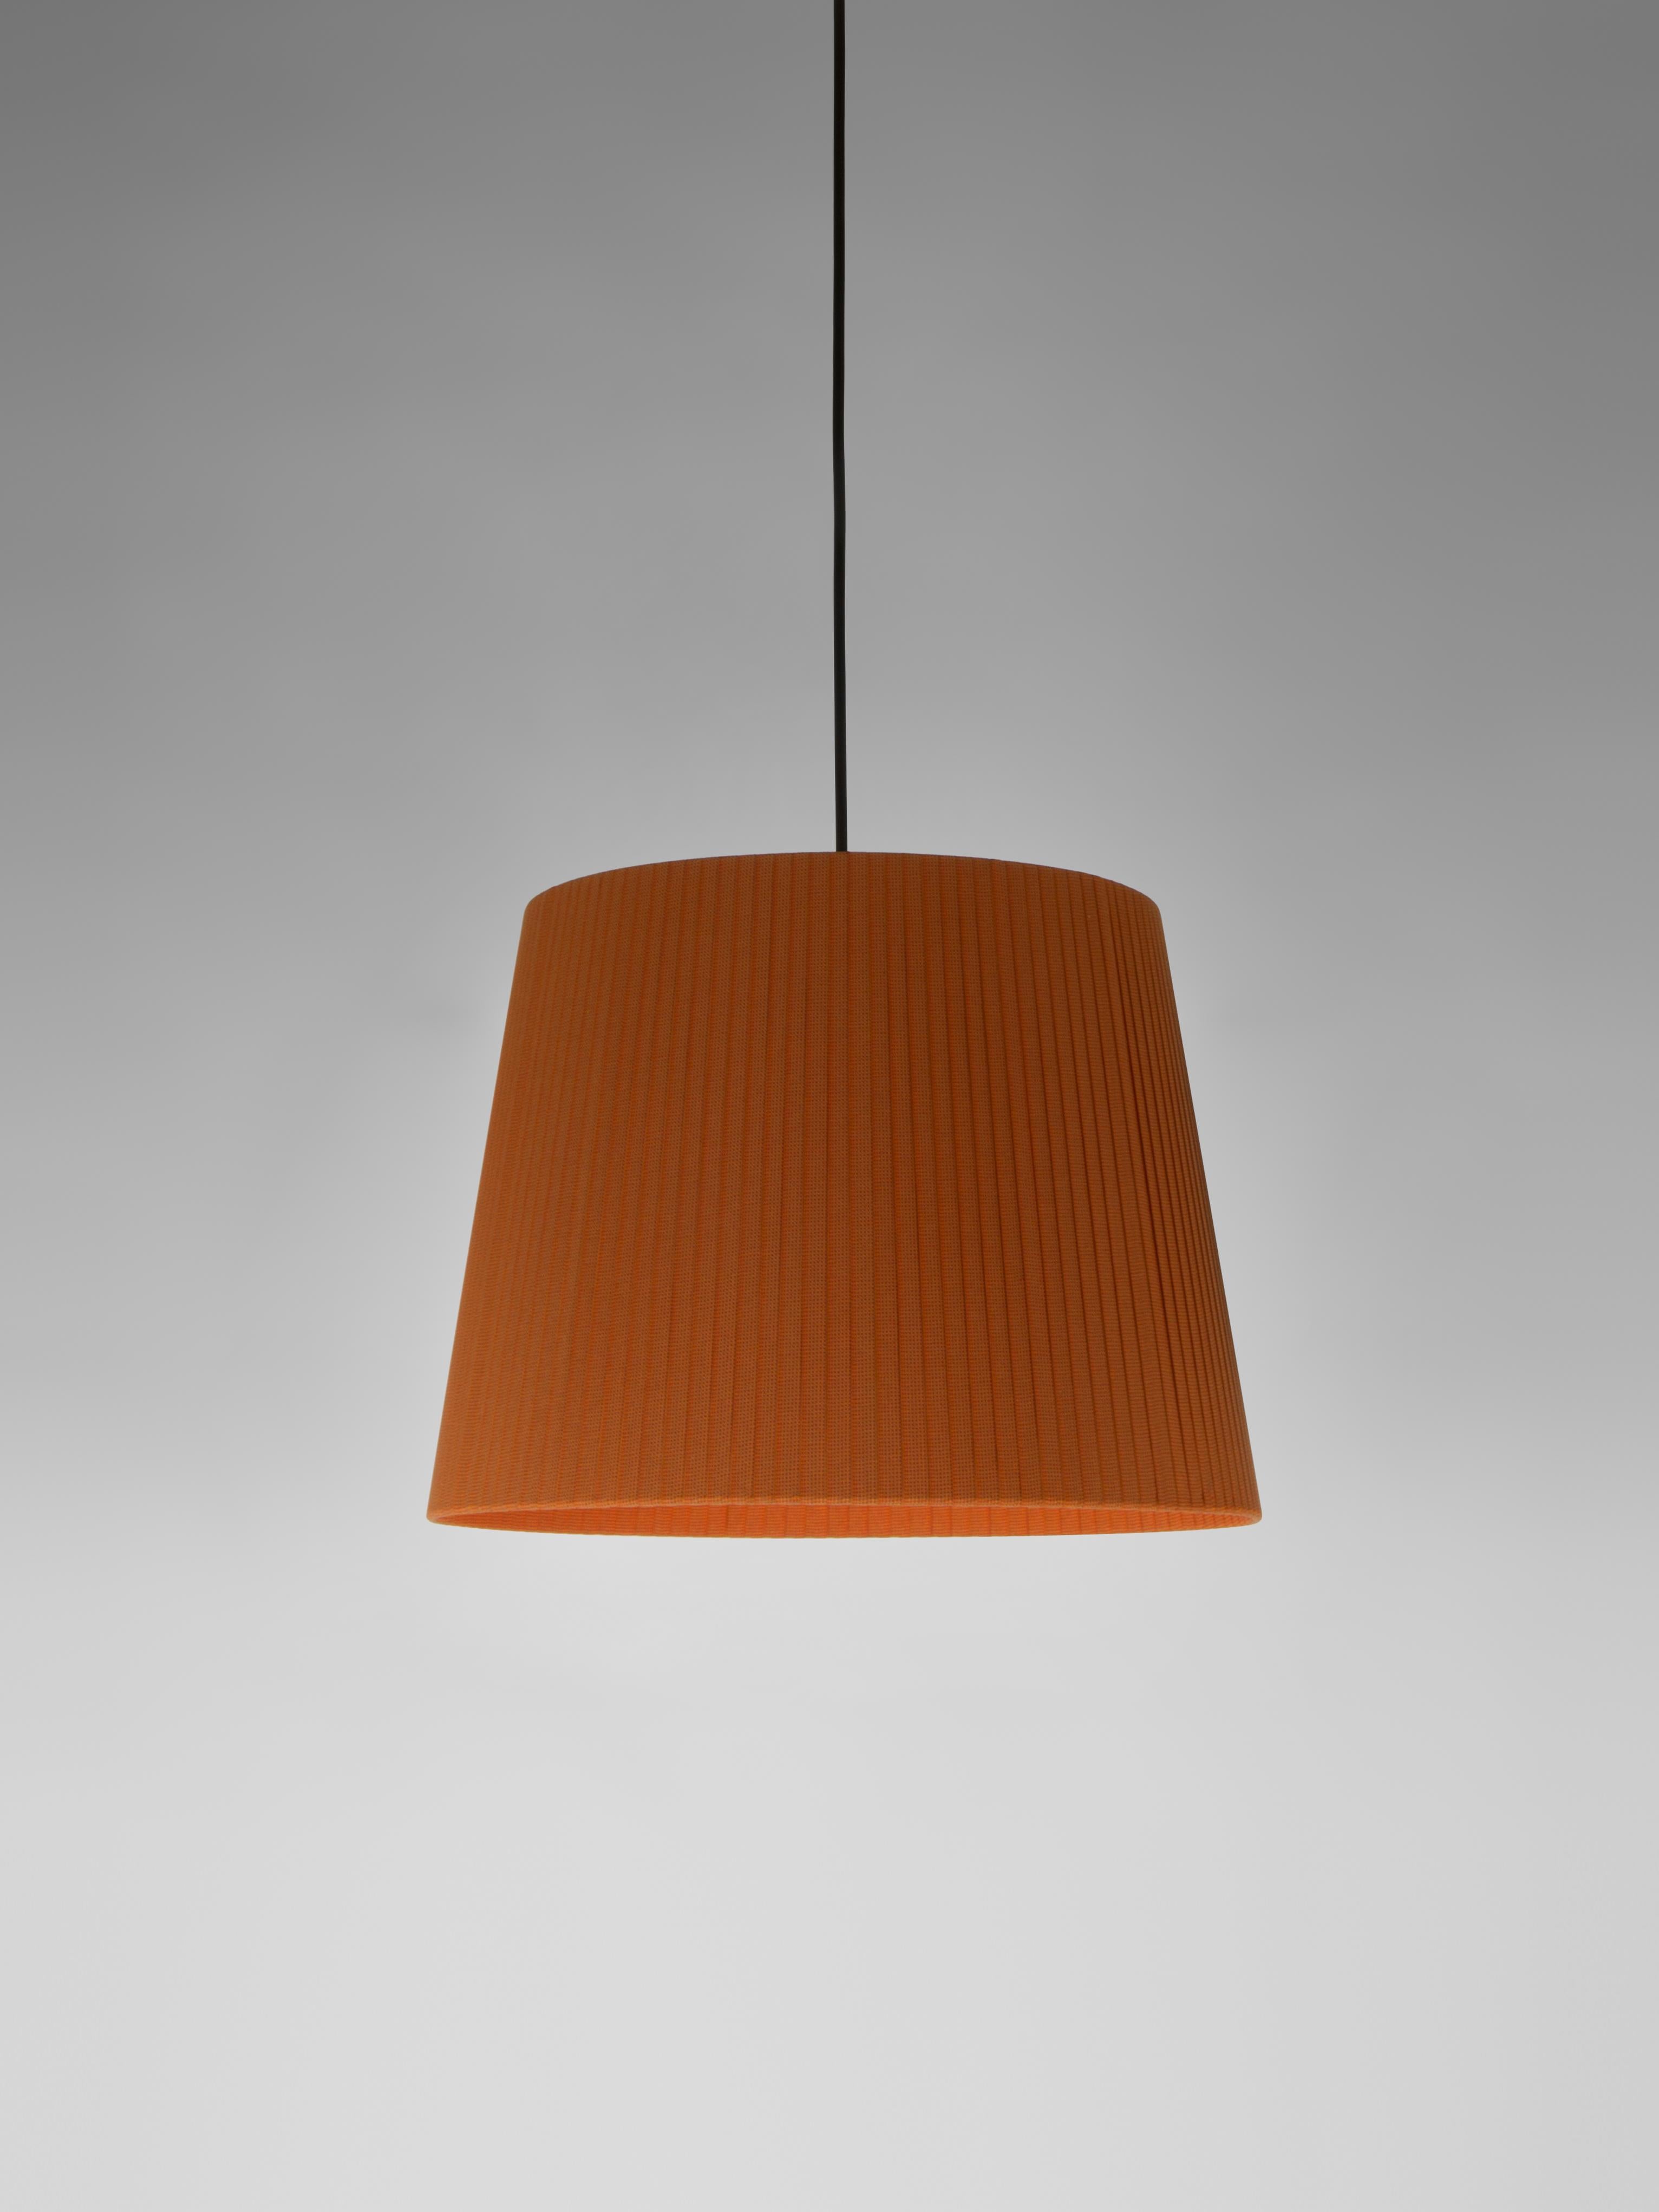 Terracotta sísísí cónicas GT3 pendant lamp by Santa & Cole
Dimensions: D 36 x H 27 cm
Materials: Metal, ribbon.
Available in other colors.

The conical shape group has multiple finishes and sizes. It consists of four sizes: PT1, MT1, GT1 and